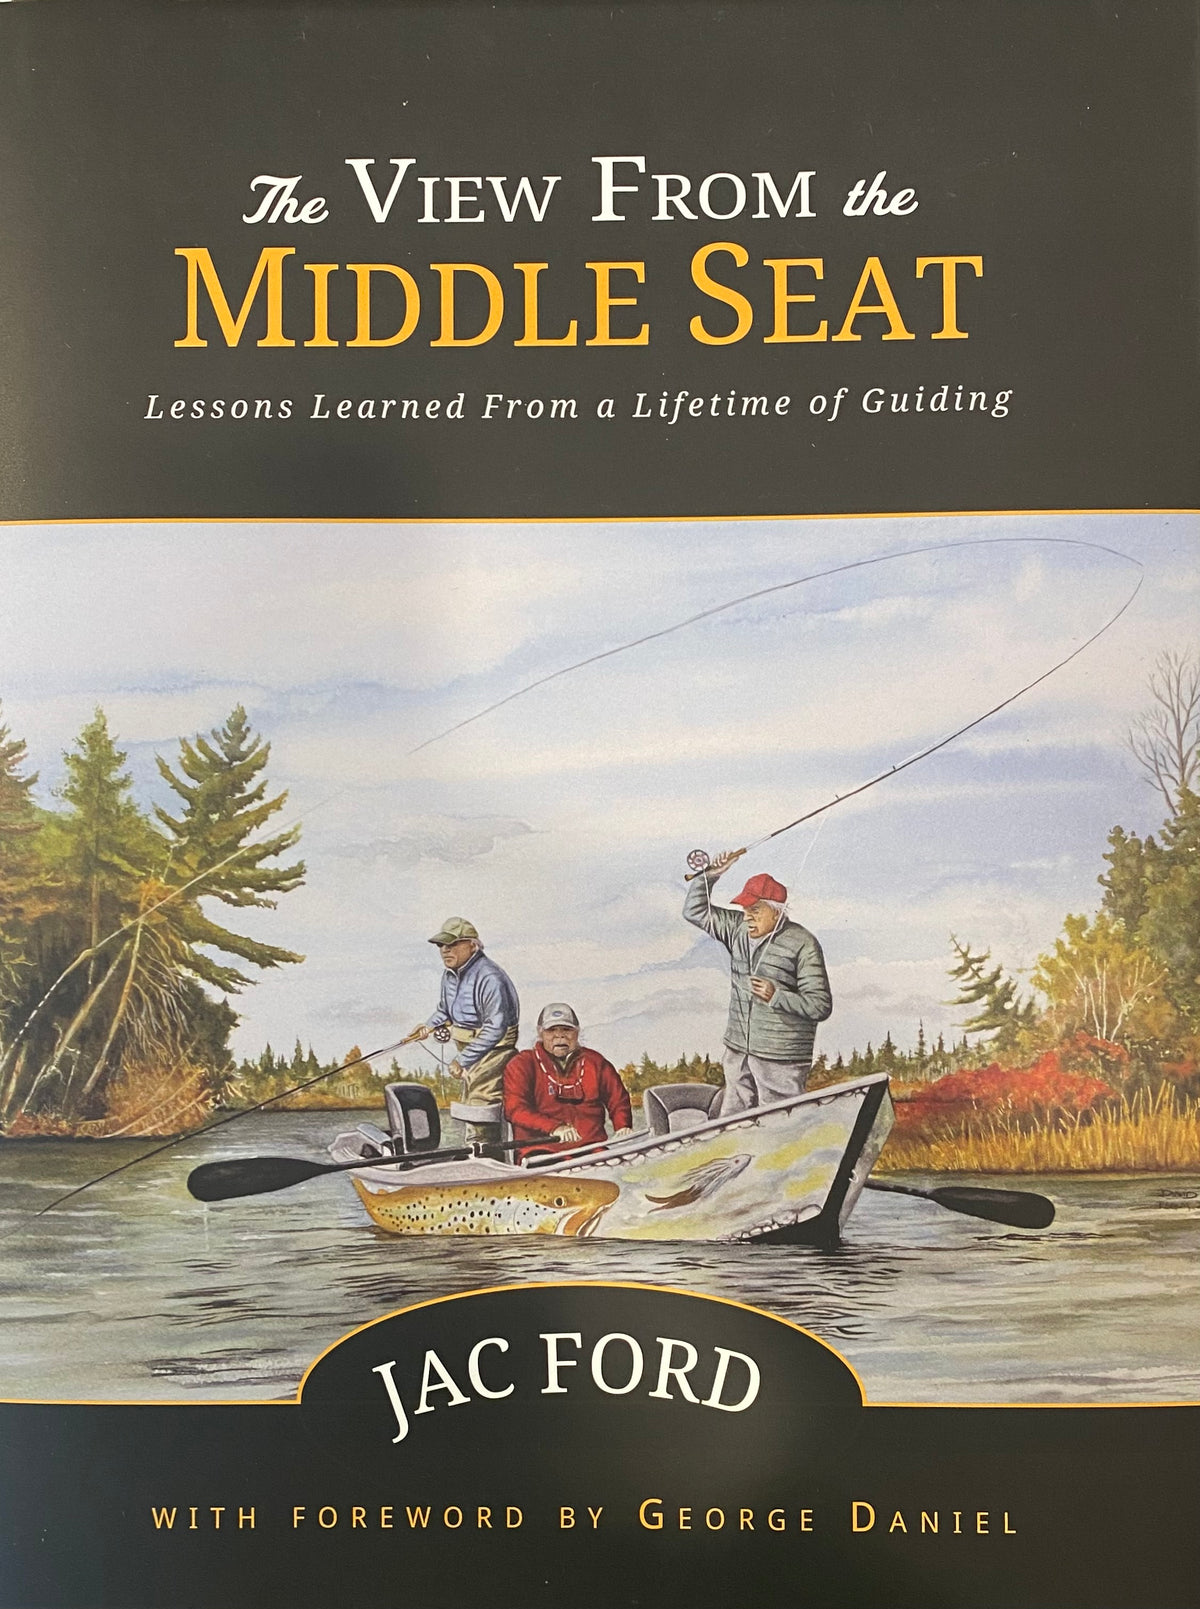 The View From The Middle Seat - Lessons Learned From a Lifetime of Guiding  by Jac Ford - Wolf Creek Angler